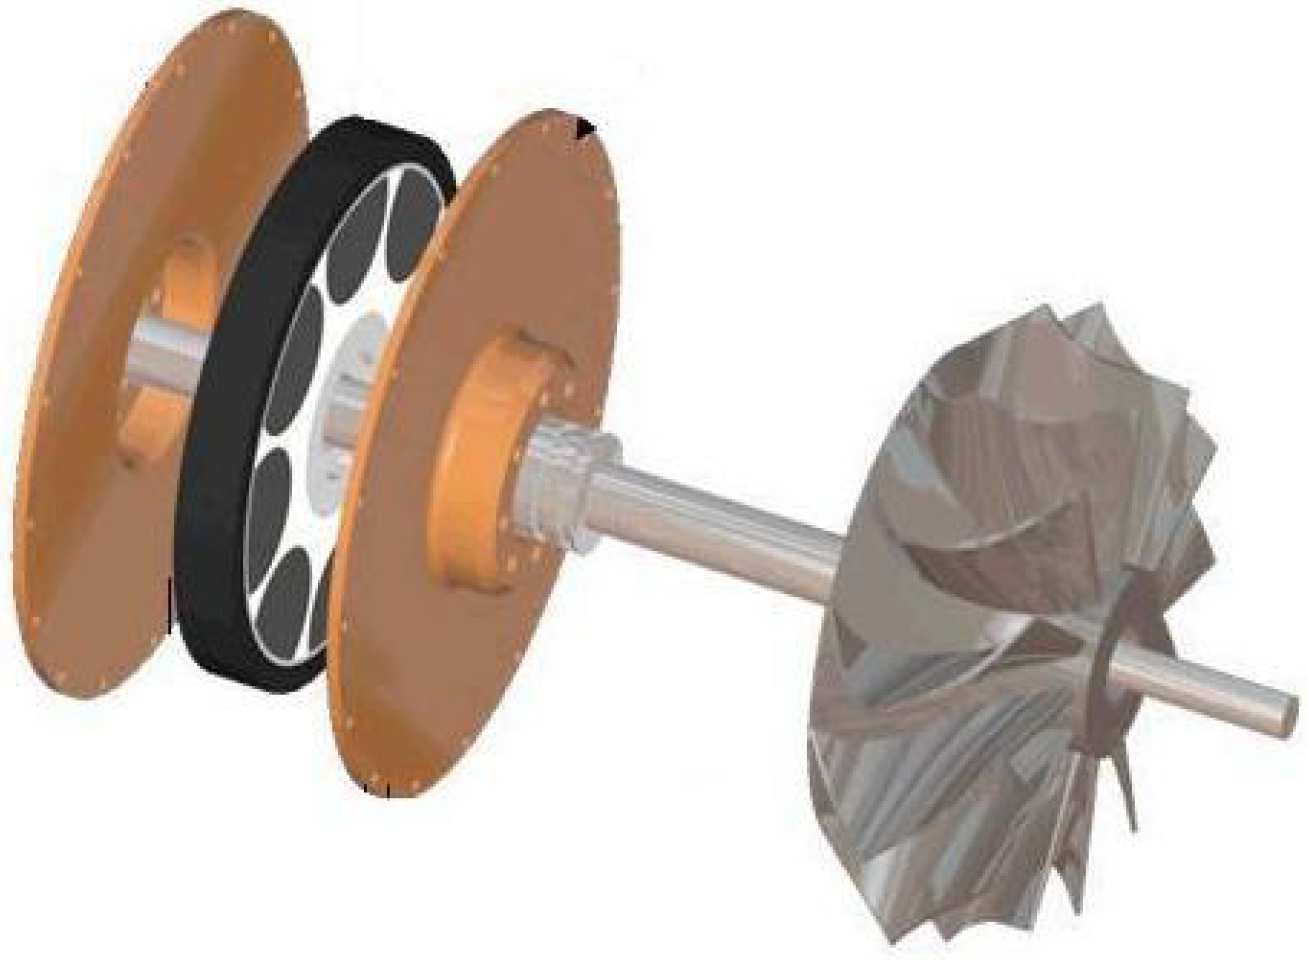 Main components of the dynamometer - the stators, the magnet and the rotor